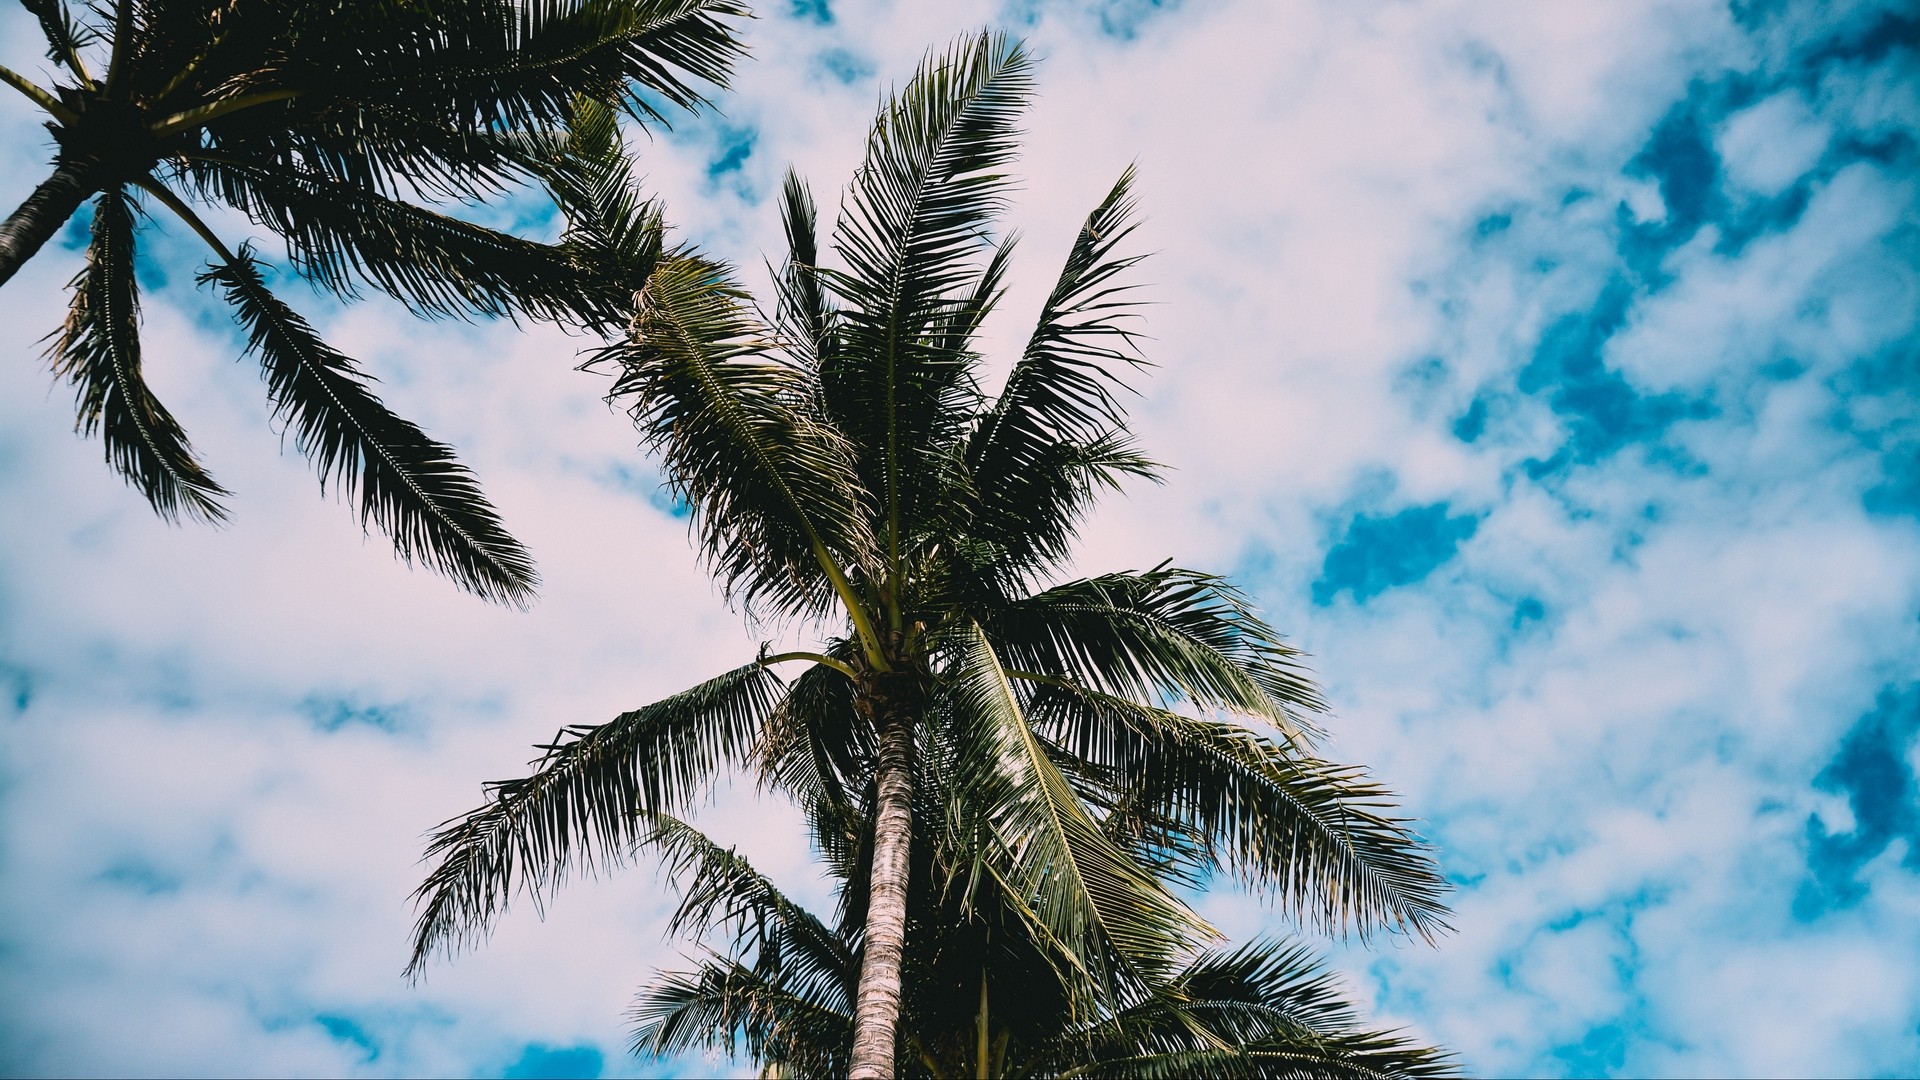 1920x1080 wallpapers: palm trees, tree, leaves, sky (image)